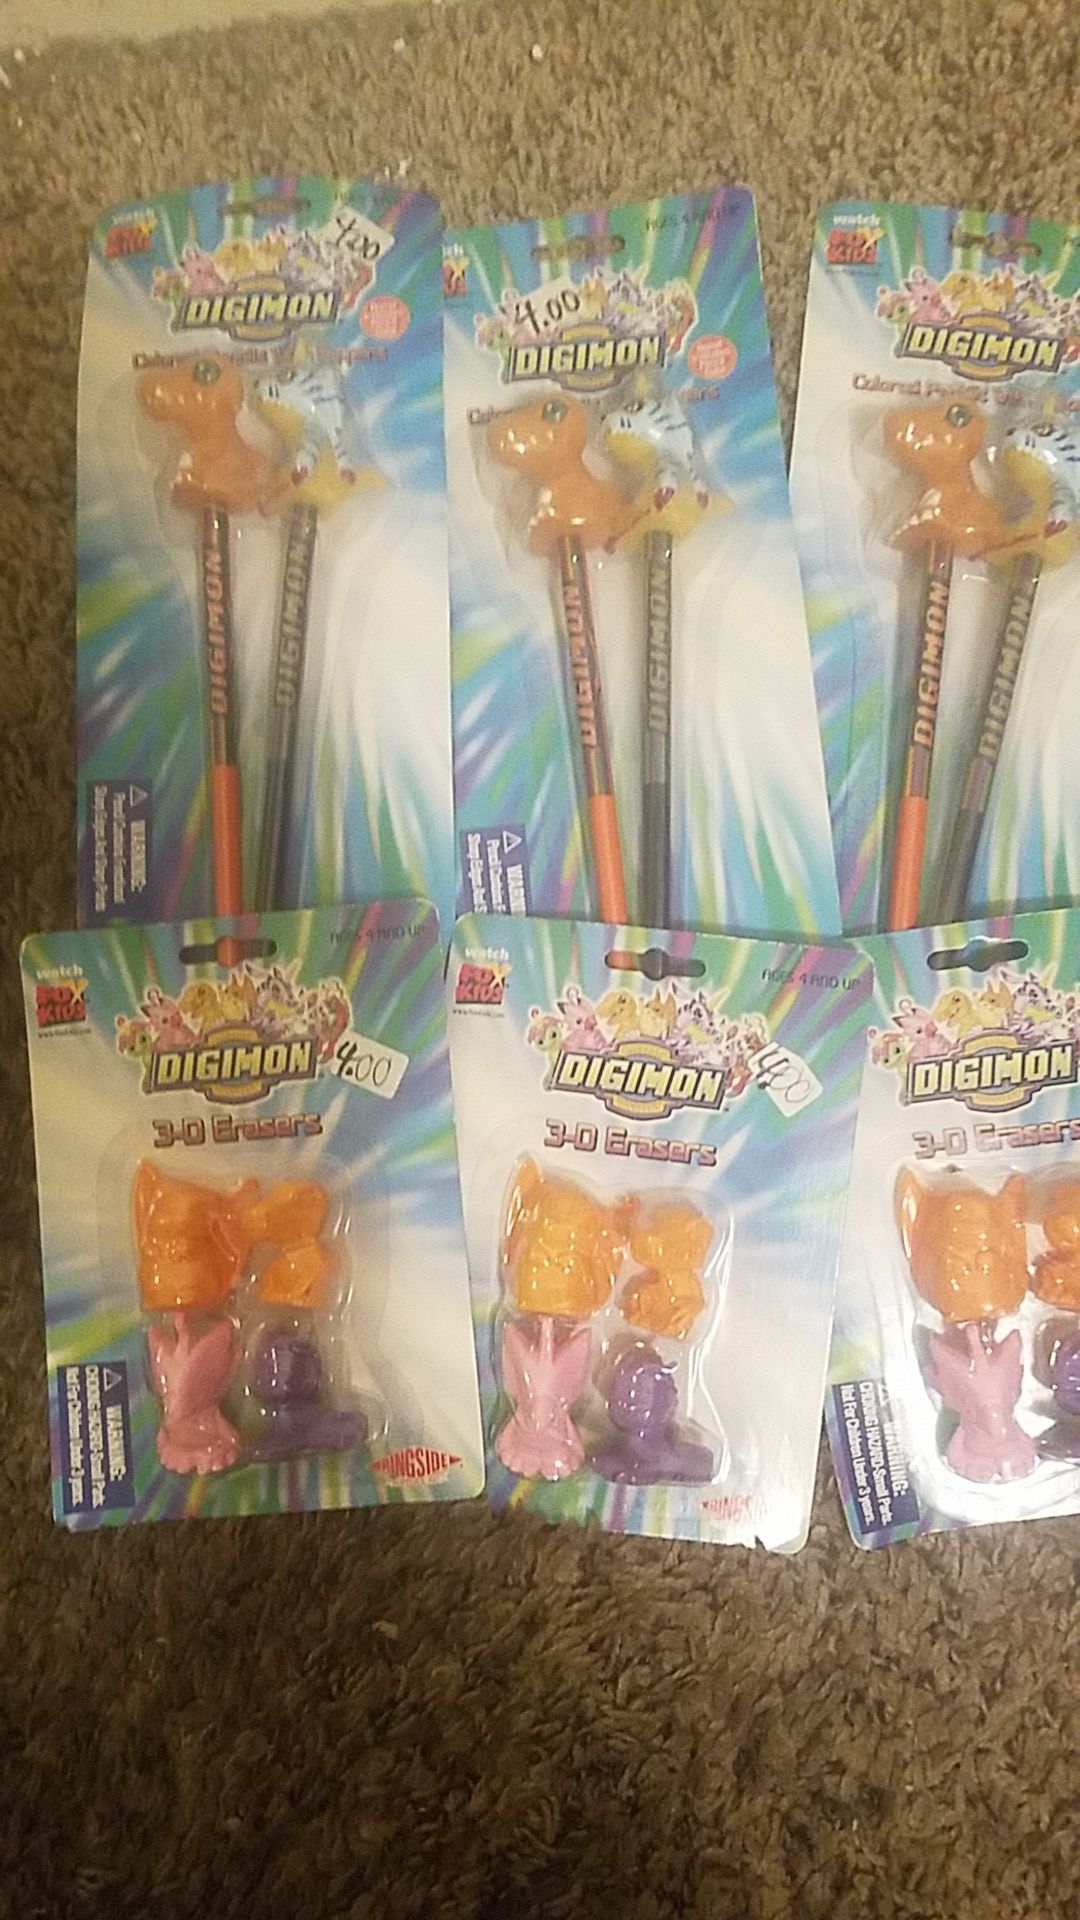 Digimon Colored Pencils with Toppers and 3-D Erasers New in the package!